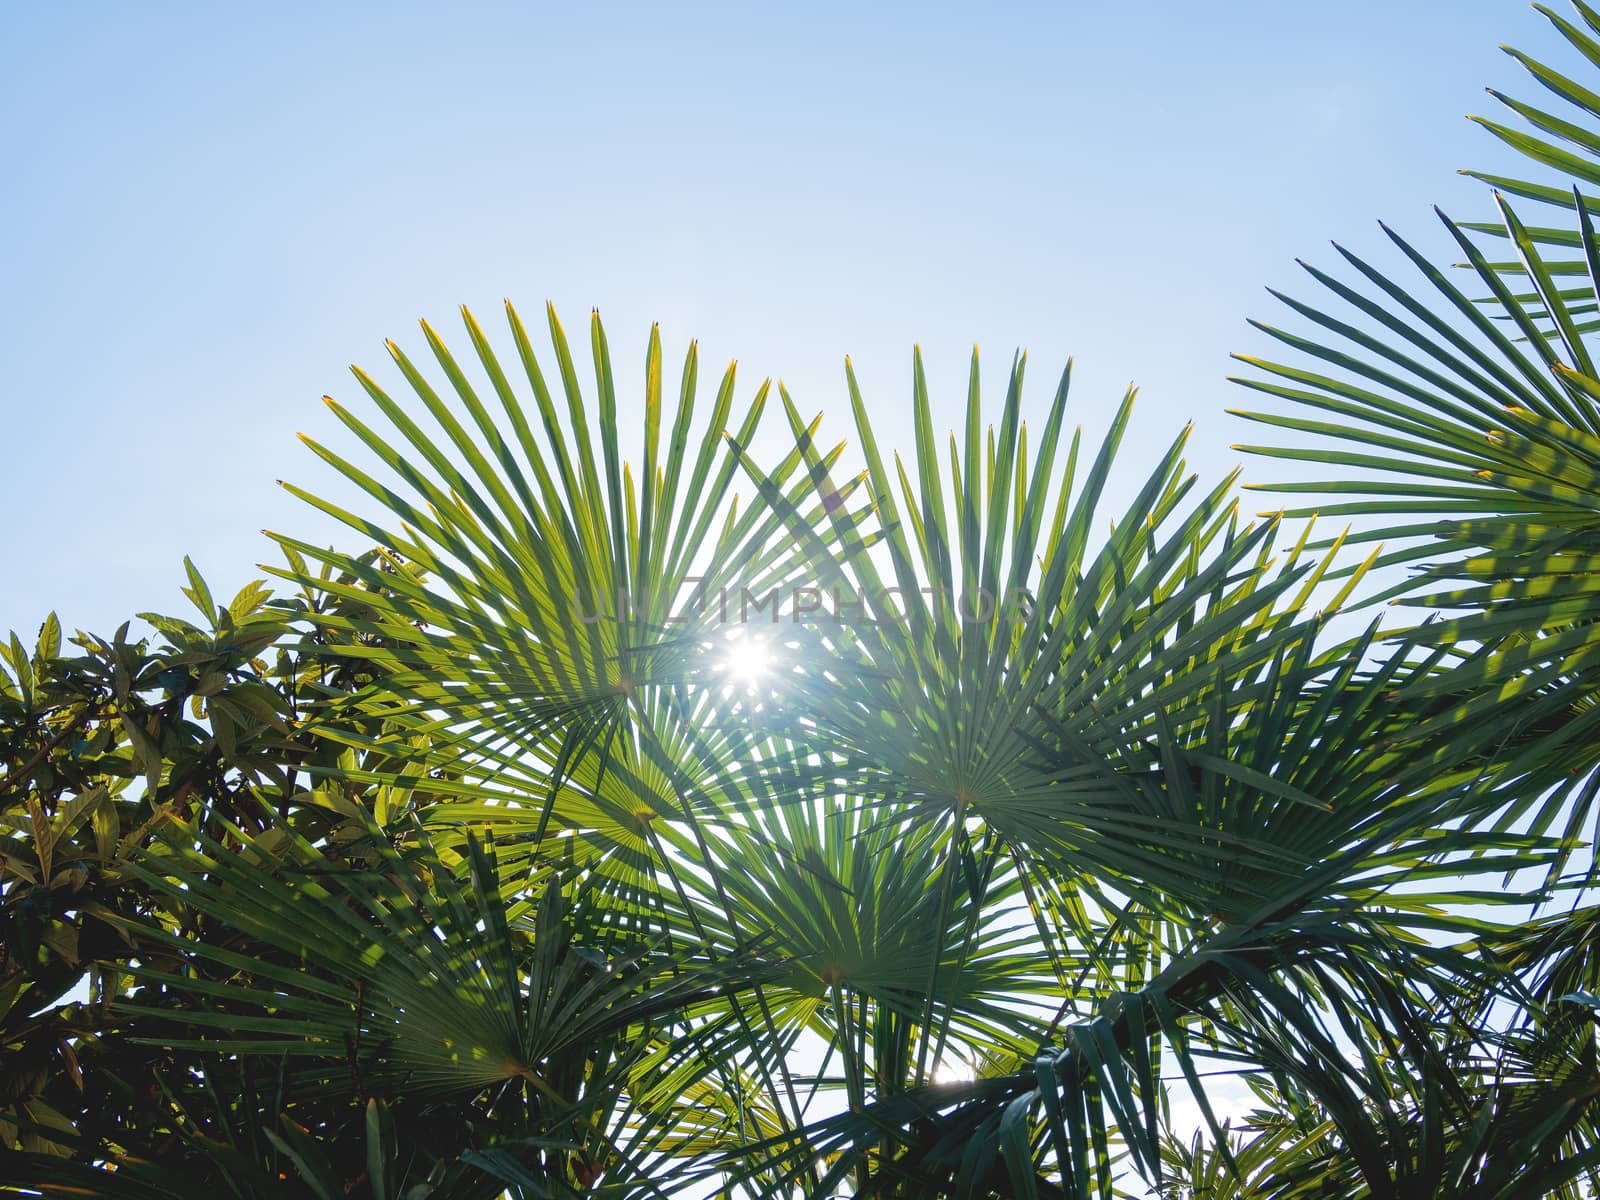 Sun shines on palm tree leaves. Tropical trees with fresh green foliage.